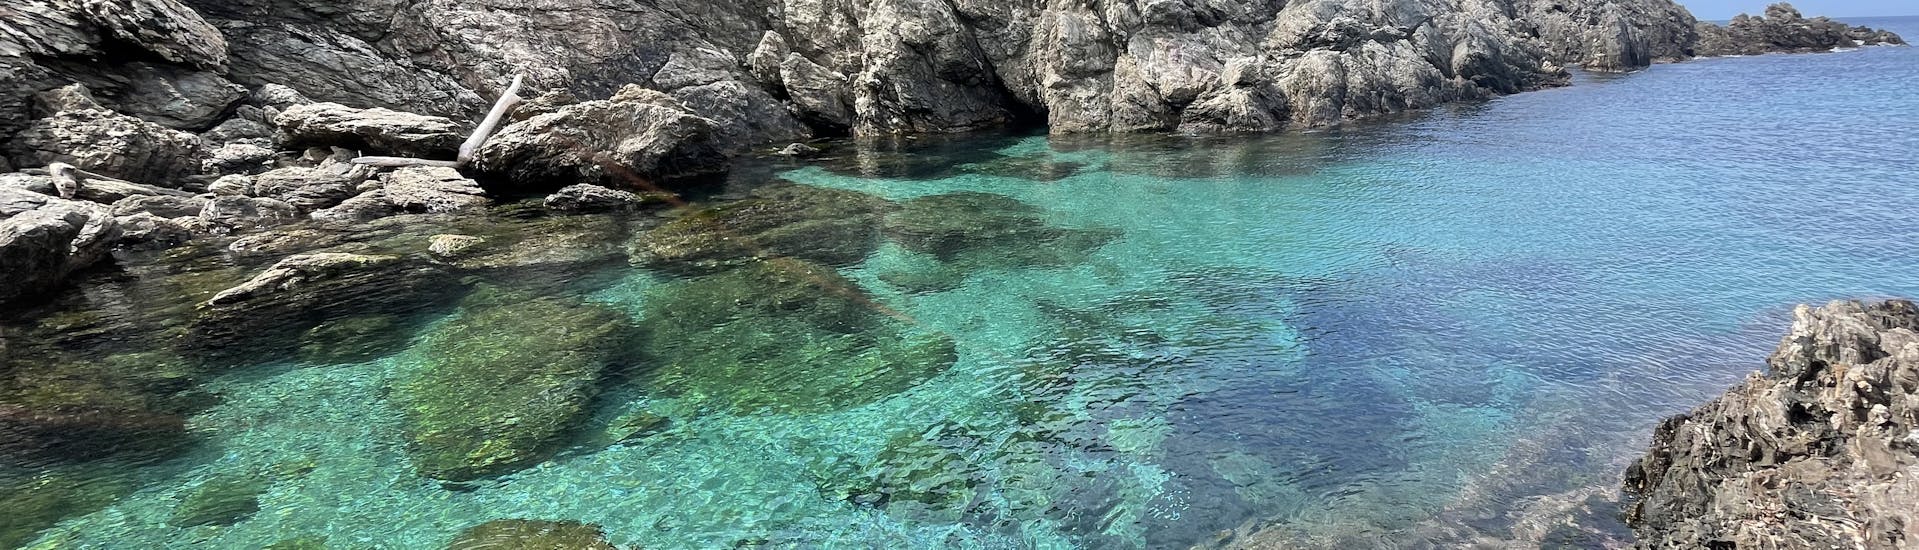 View of a Cove during the Round-Trip to Port-Cros and Porquerolles Islands with les bateaux verts.